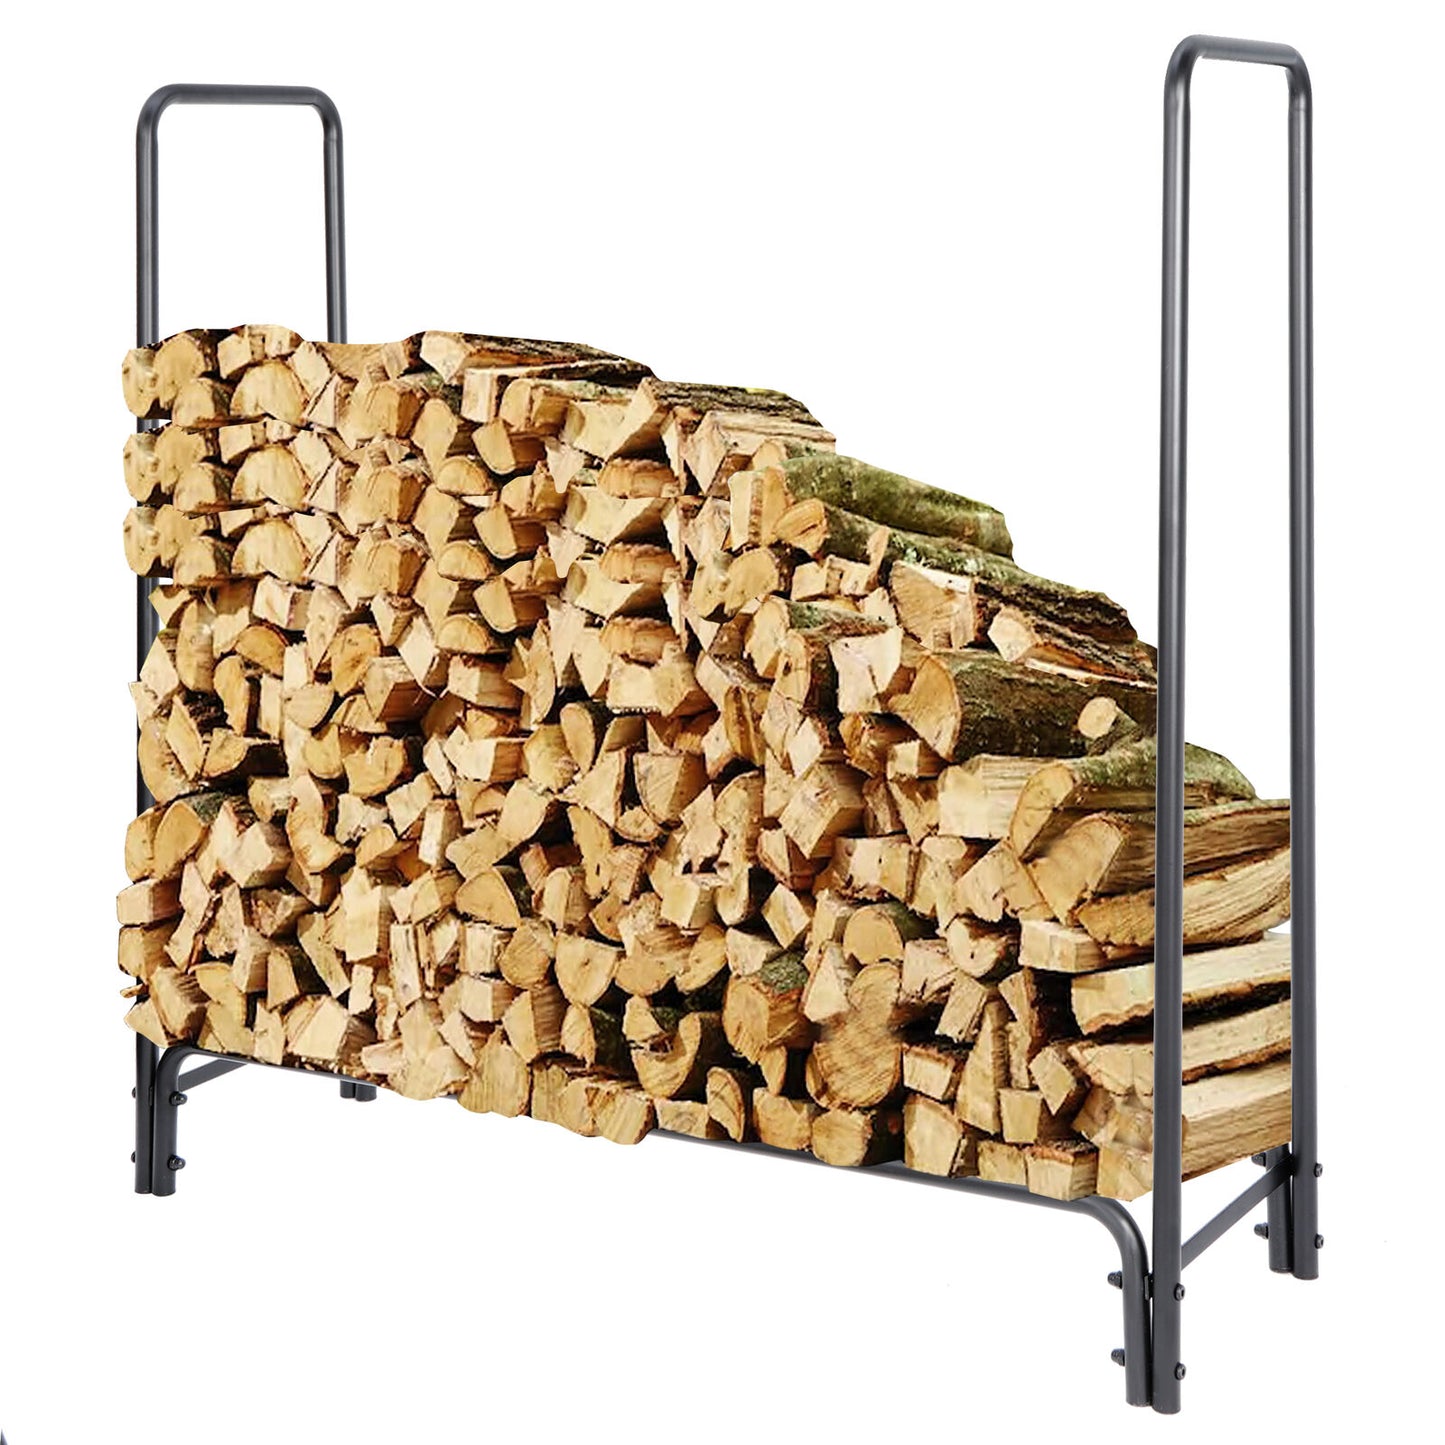 4FT Firewood Log Rack Wood Lumber Storage Holder for Fireplace Stove Fire Pit